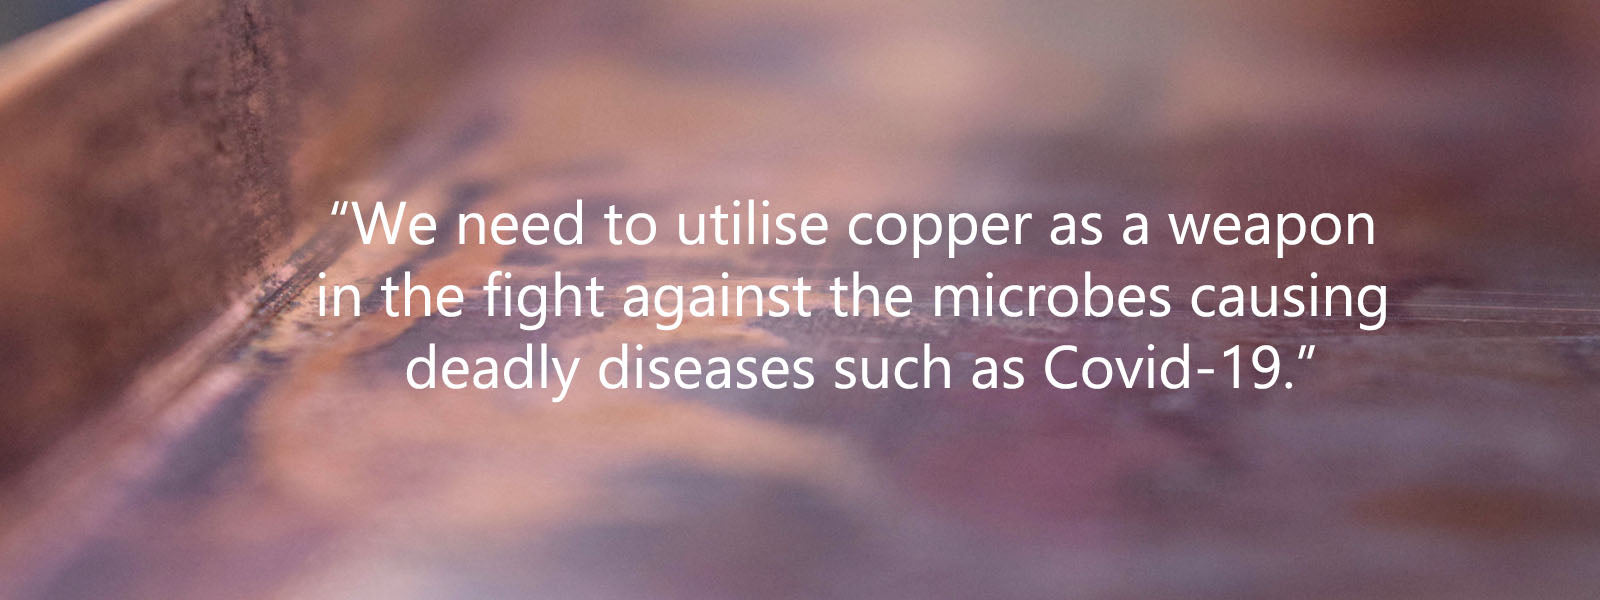 use copper as a weapon against disease